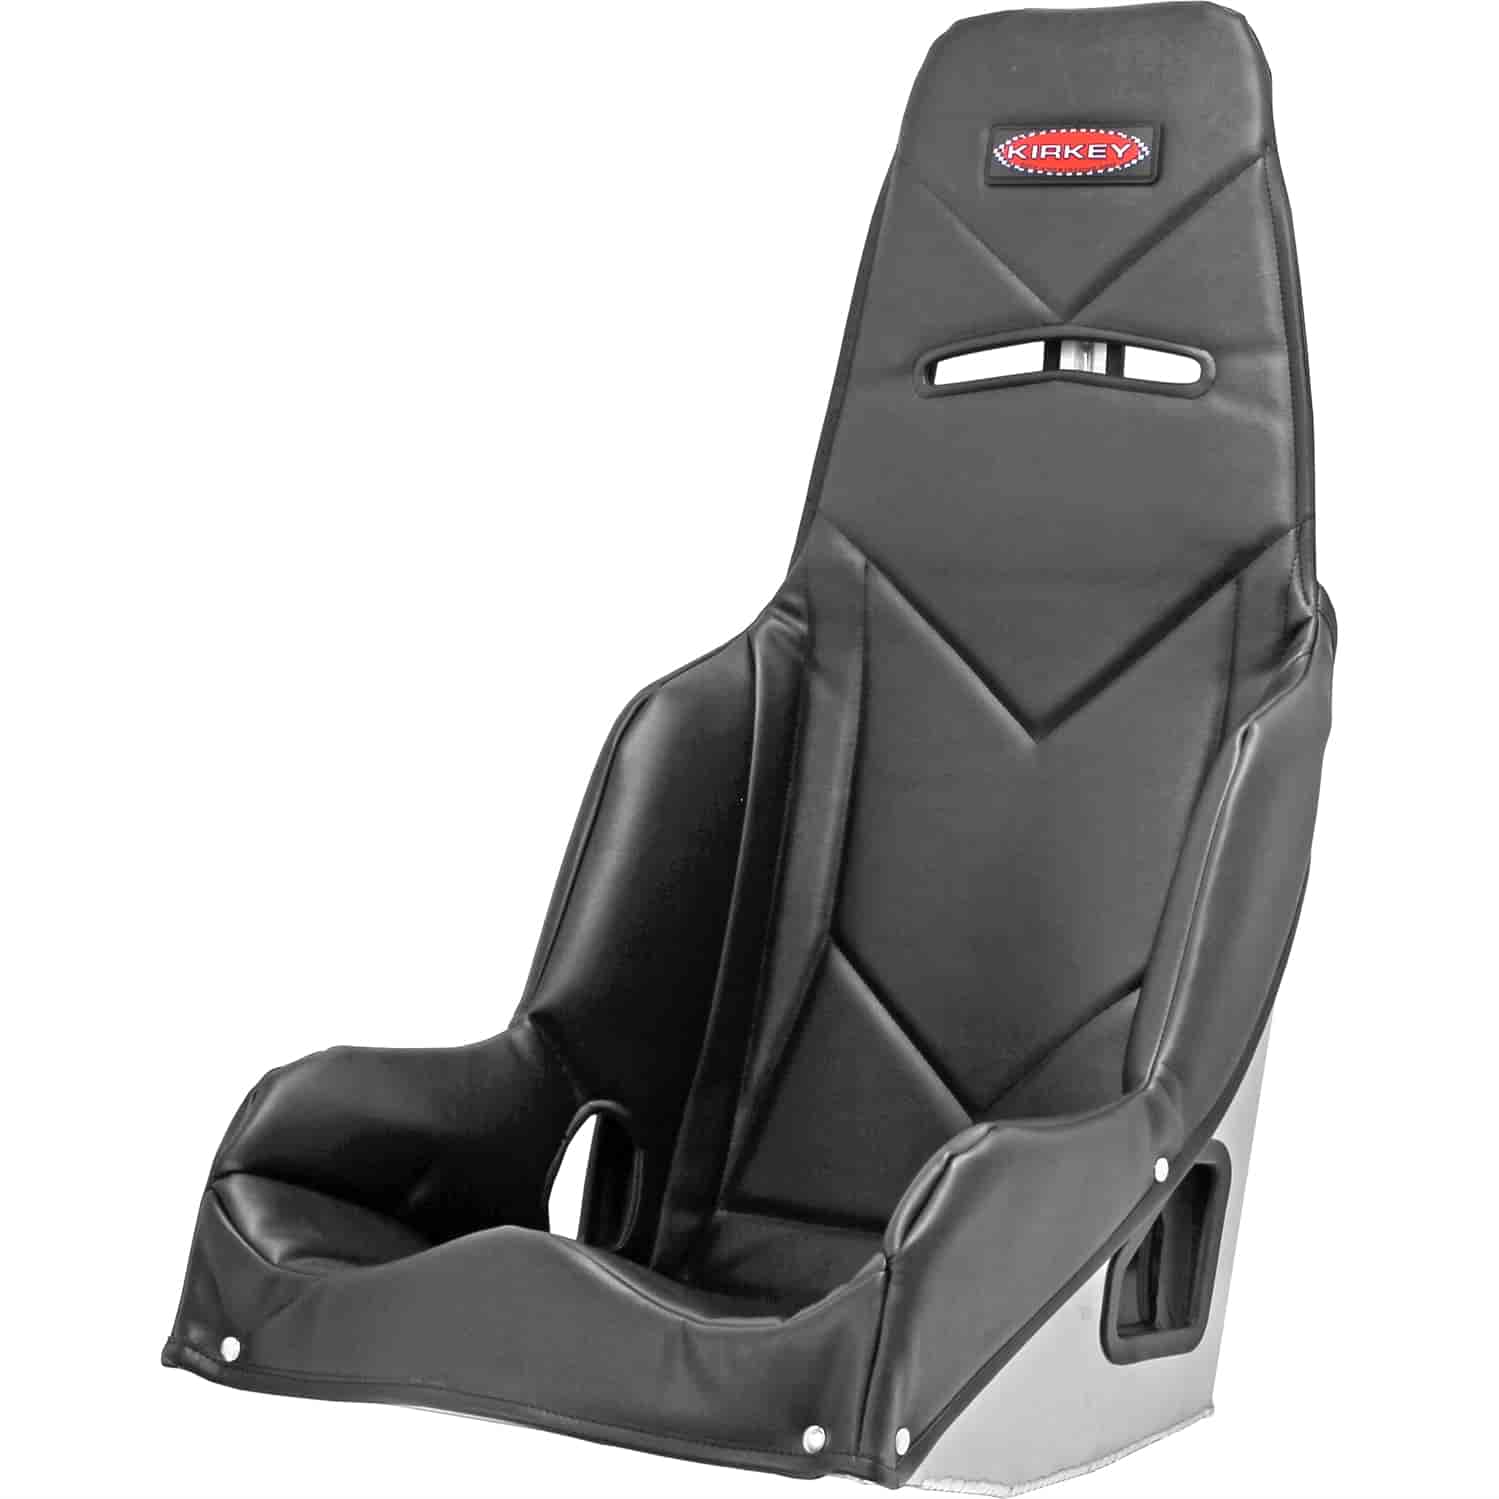 55 Series Pro Street Drag Seat Cover 17" Hip Width